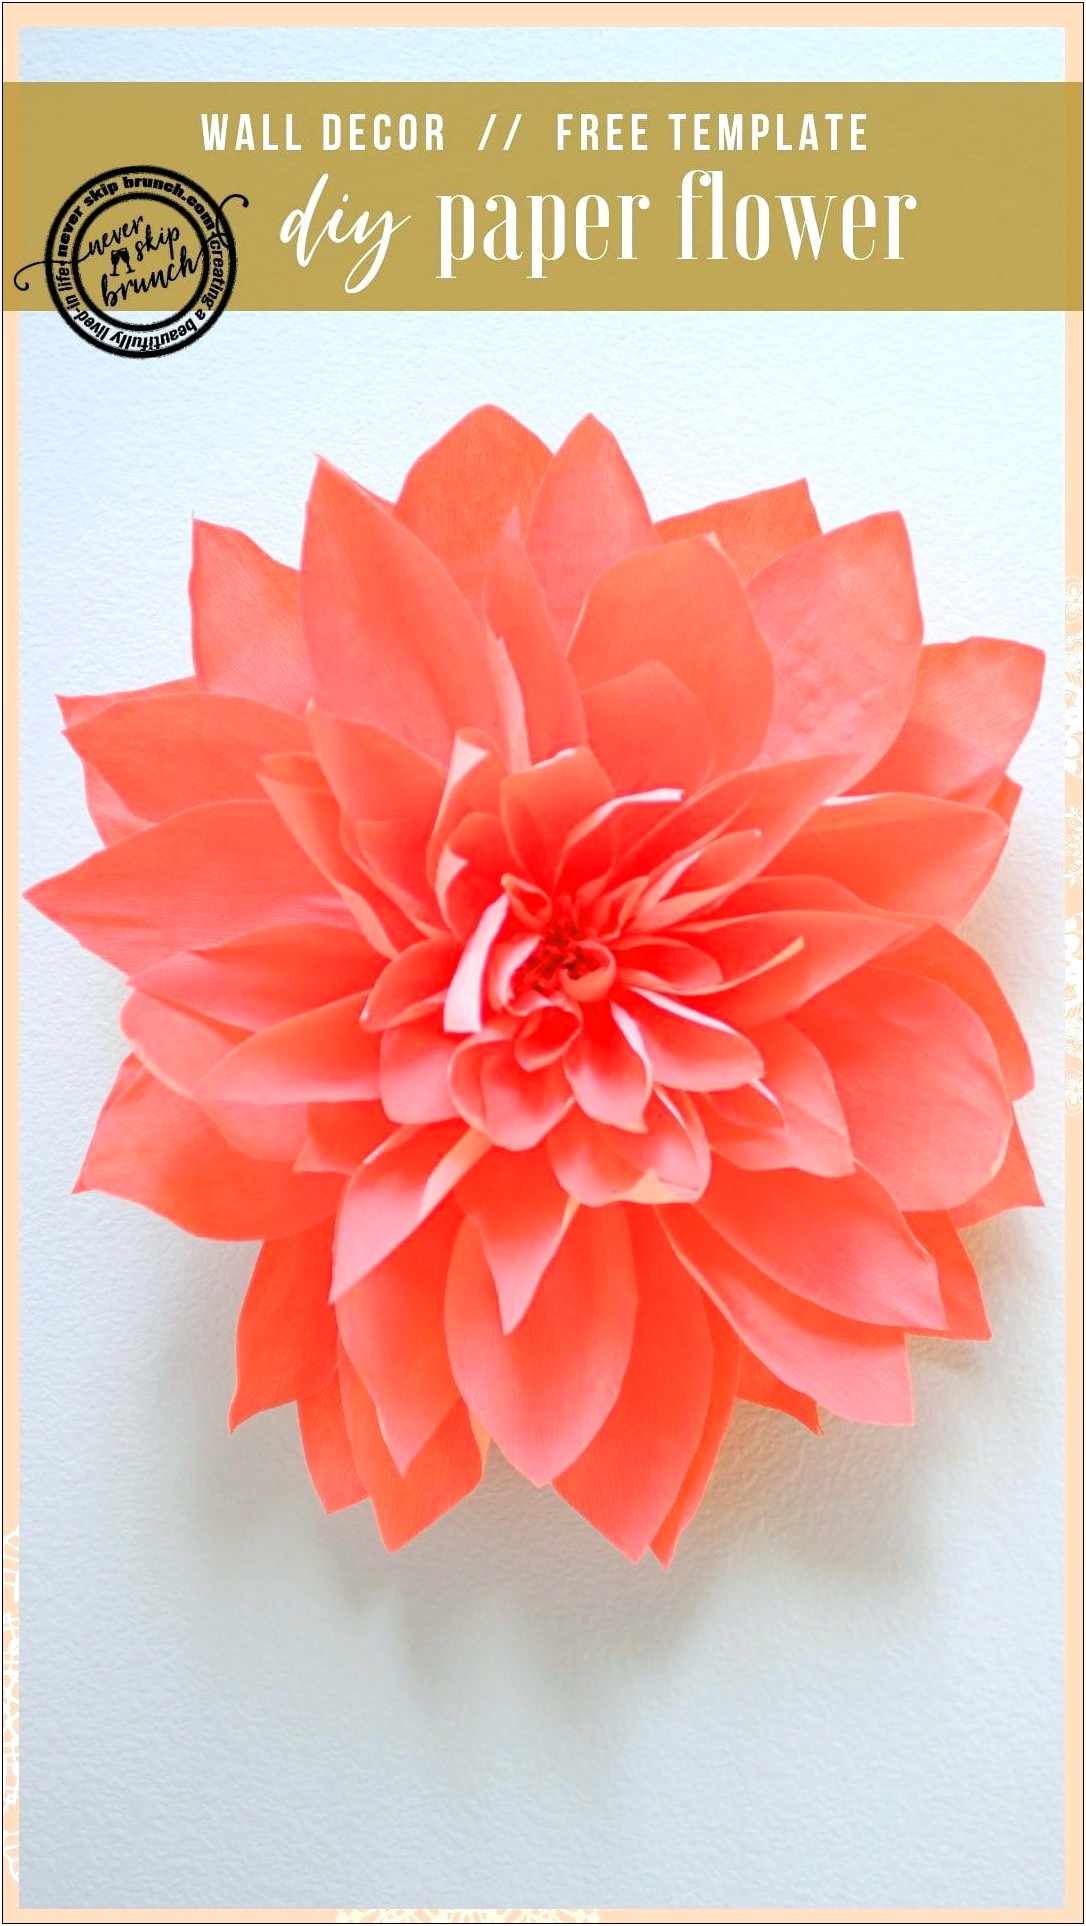 Free Diy Giant Paper Flower Templates